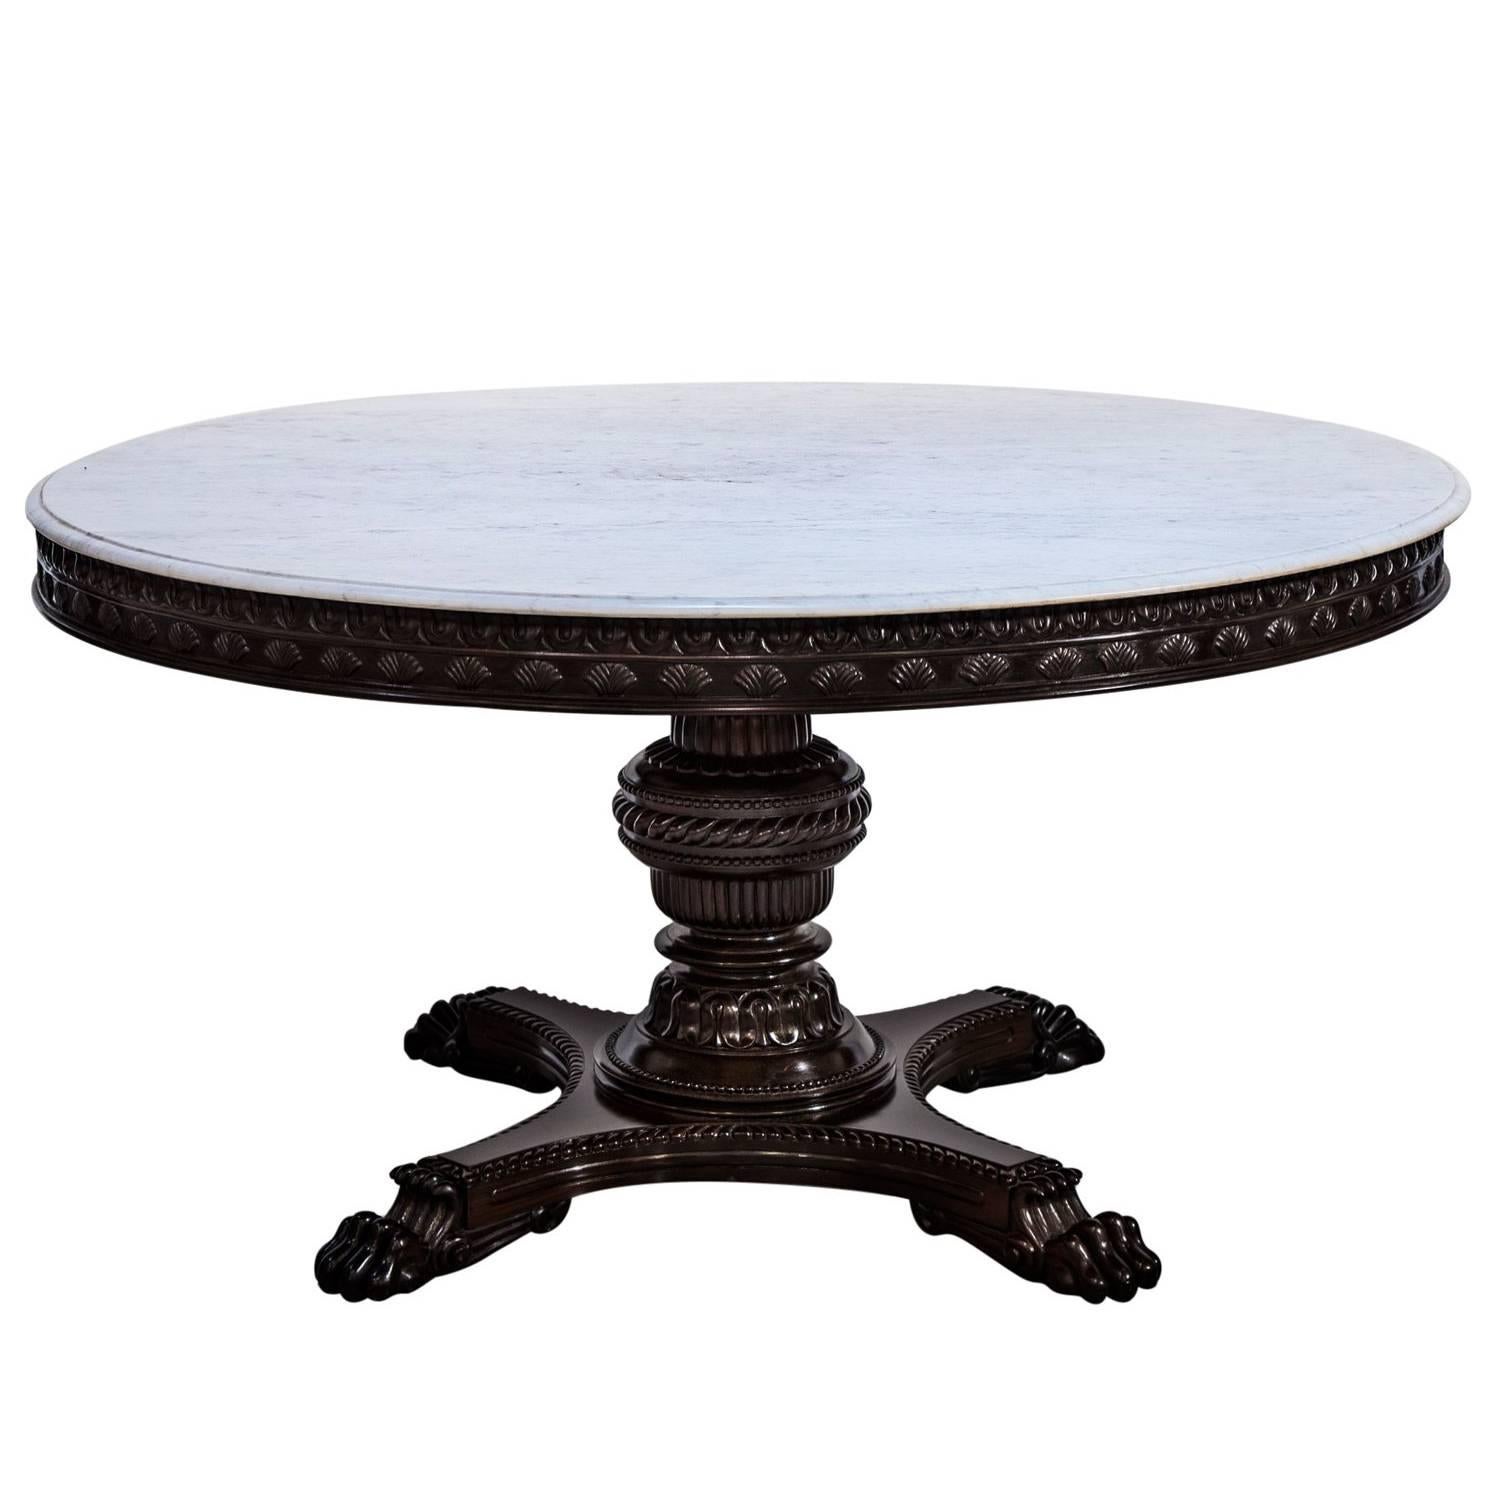 Antique Anglo-Indian or British Colonial Rosewood Dining Table with Marble Top For Sale